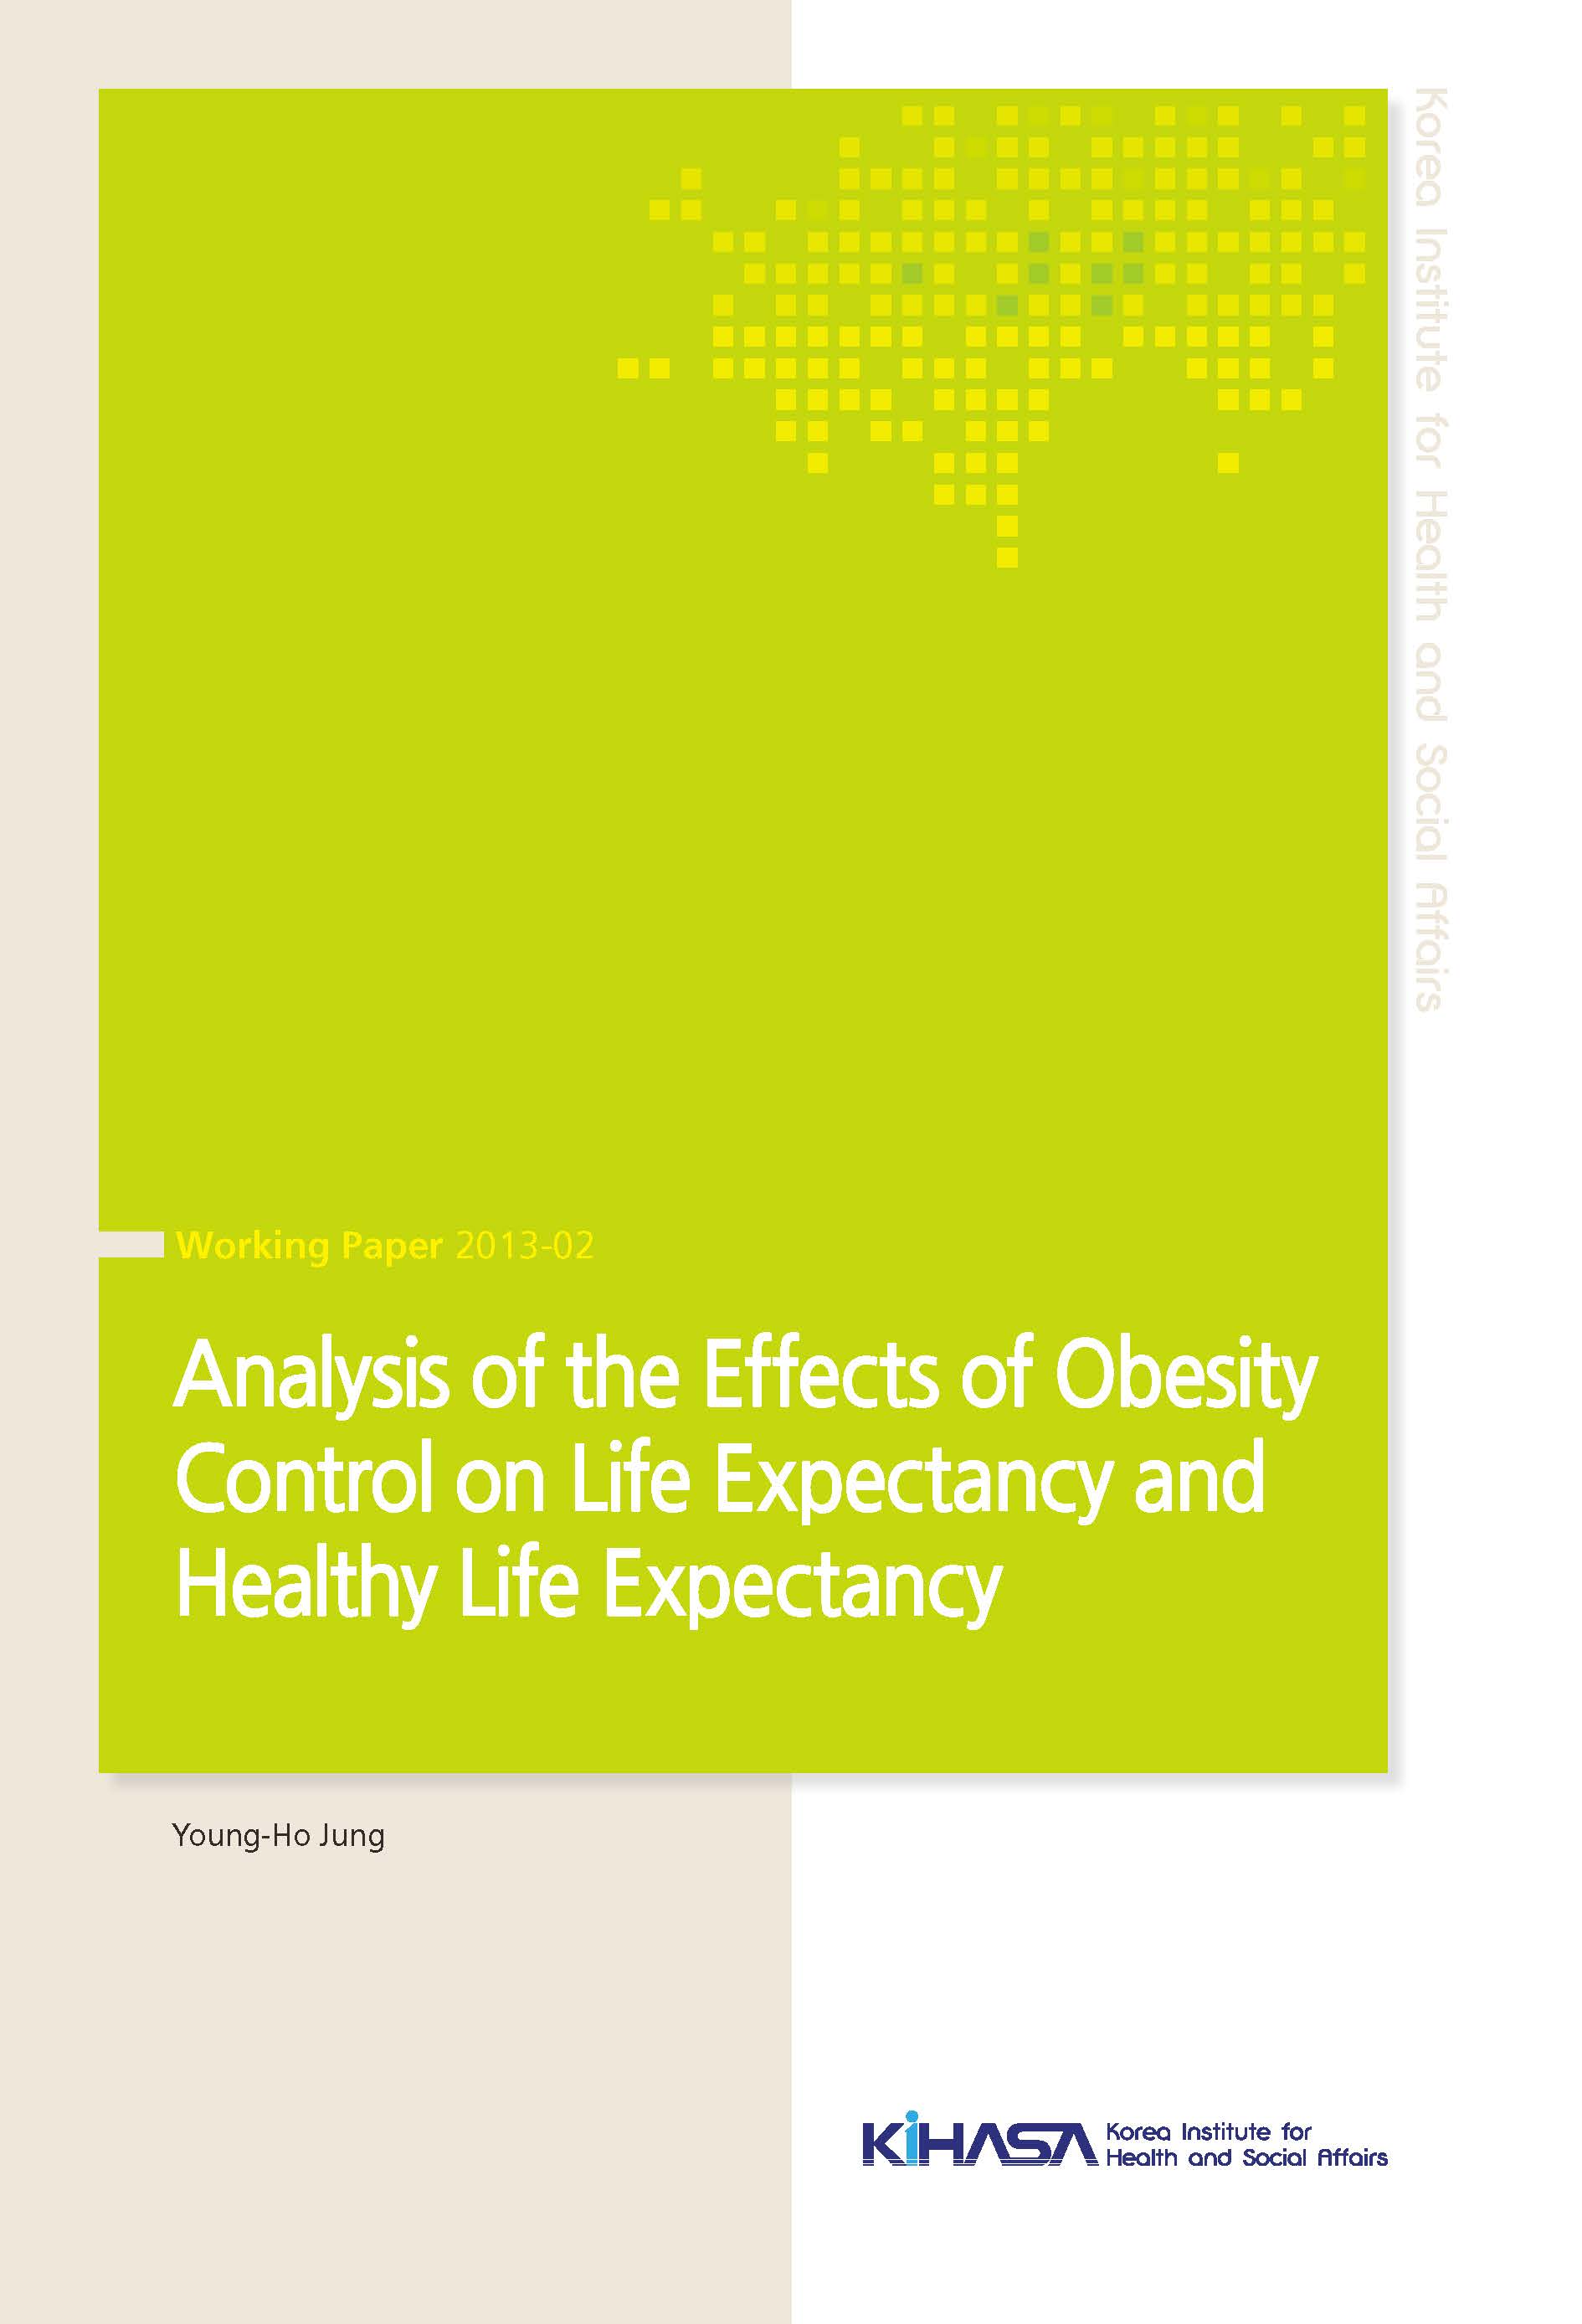 Analysis of the Effects of Obesity Control on Life Expectancy and Health Life Expectancy